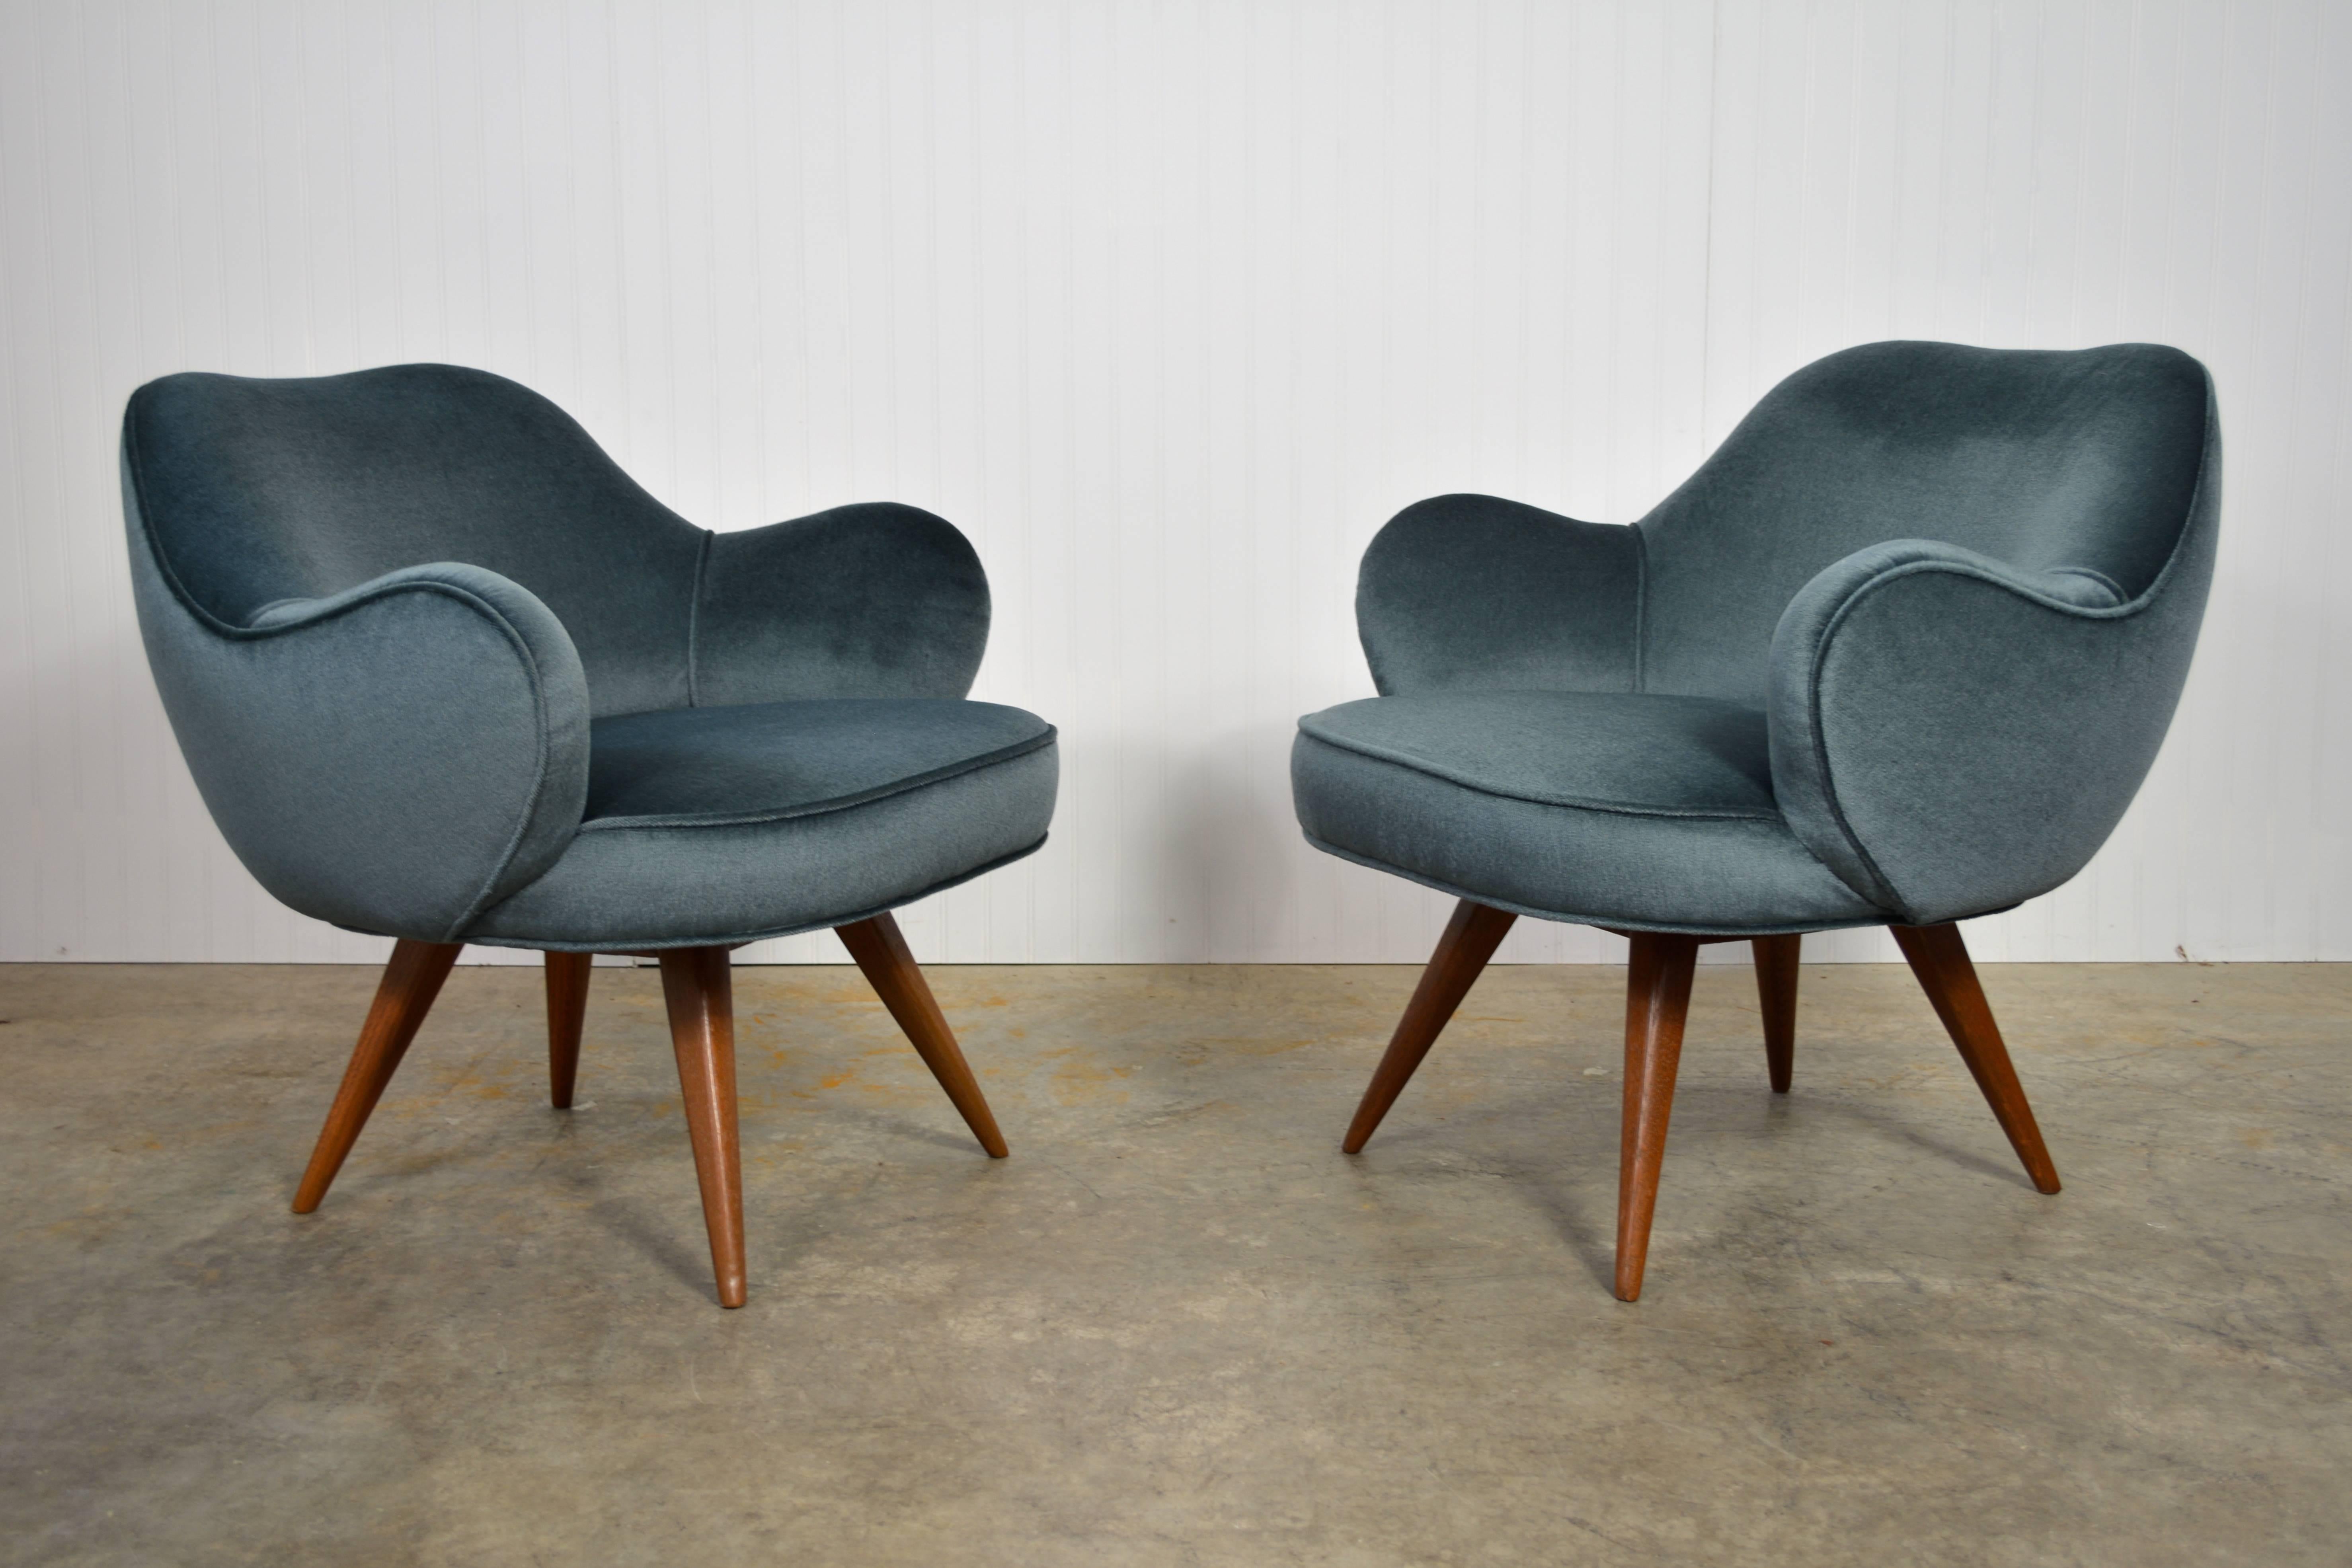 A pair of early and rare lounge chairs by Vladimir Kagan for Kagan-Dreyfuss. Newly refinished walnut legs. Recovered in mohair. 

Reference: The Complete Kagan: A Lifetime of Asvant-Garde Design, Vladimir Kagan. Page 72.